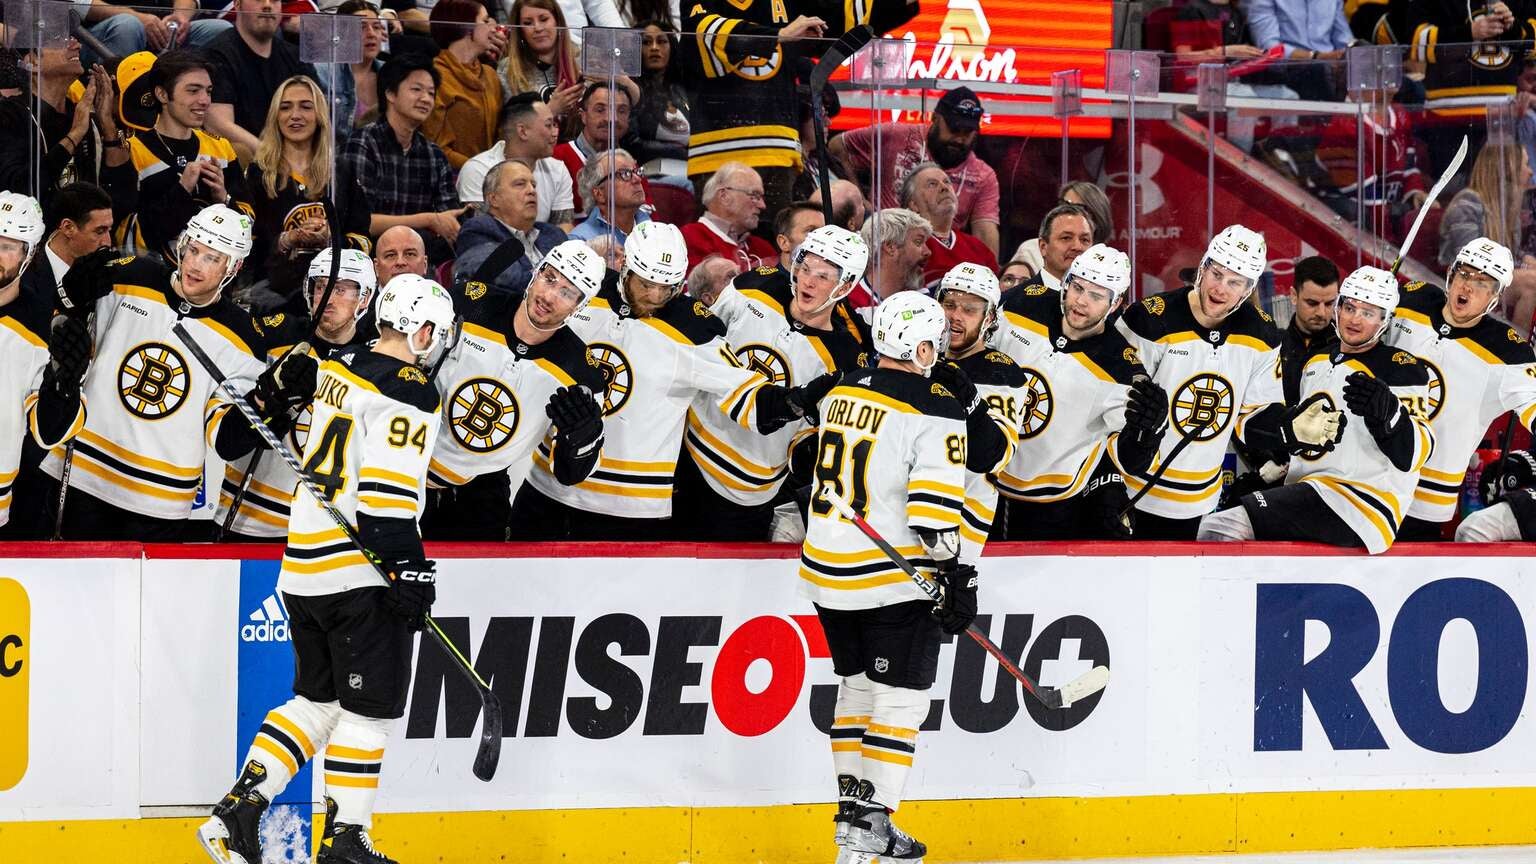 How to Stream Boston Red Sox, Bruins, Other New England Teams on NESN